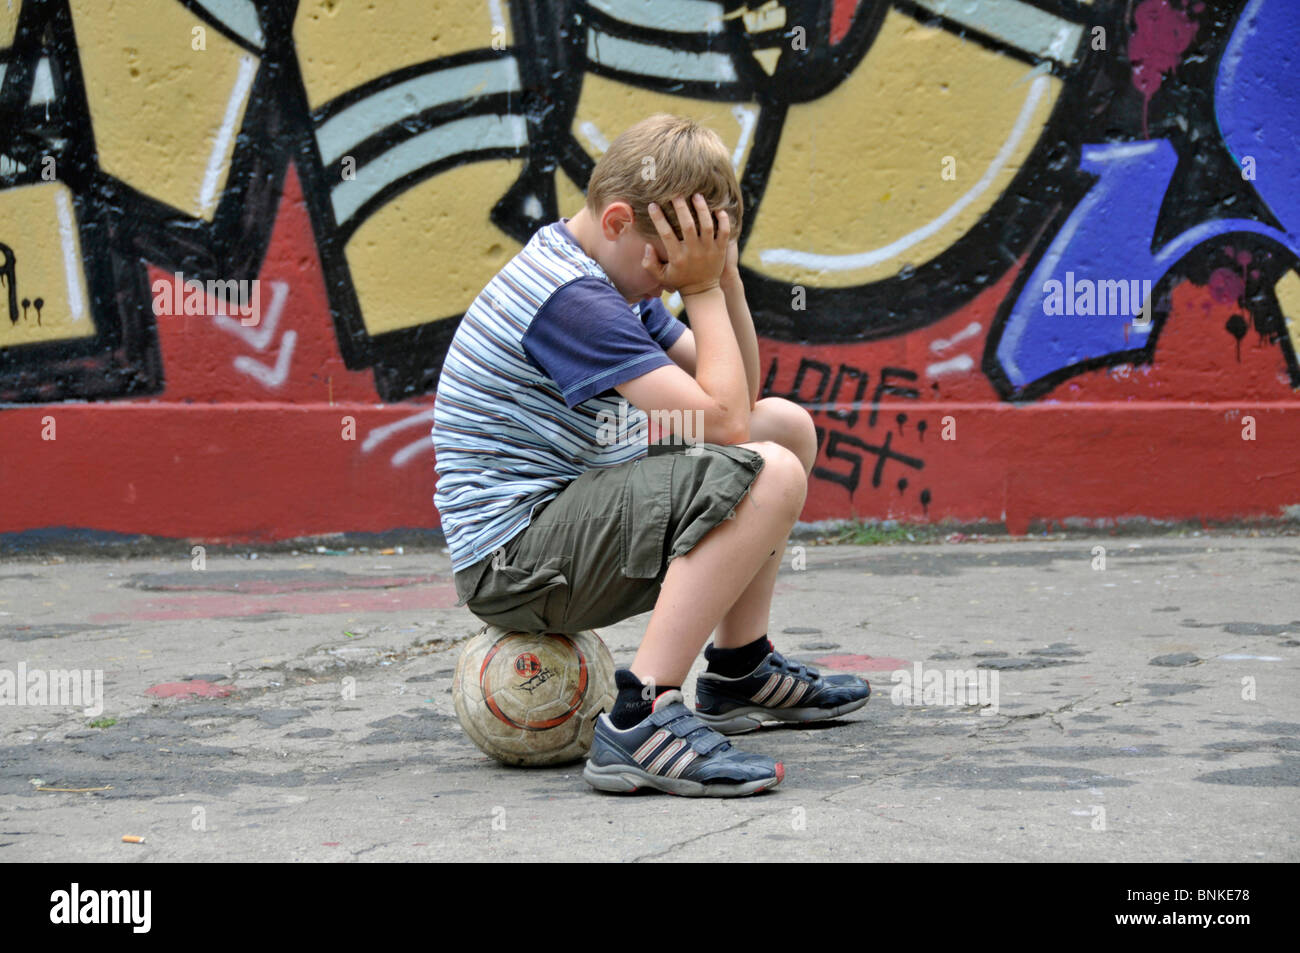 Europe Germany North Rhine-Westphalia Cologne place Bolz person person child boy boy manly frustrates sadly unhappily unluckily Stock Photo